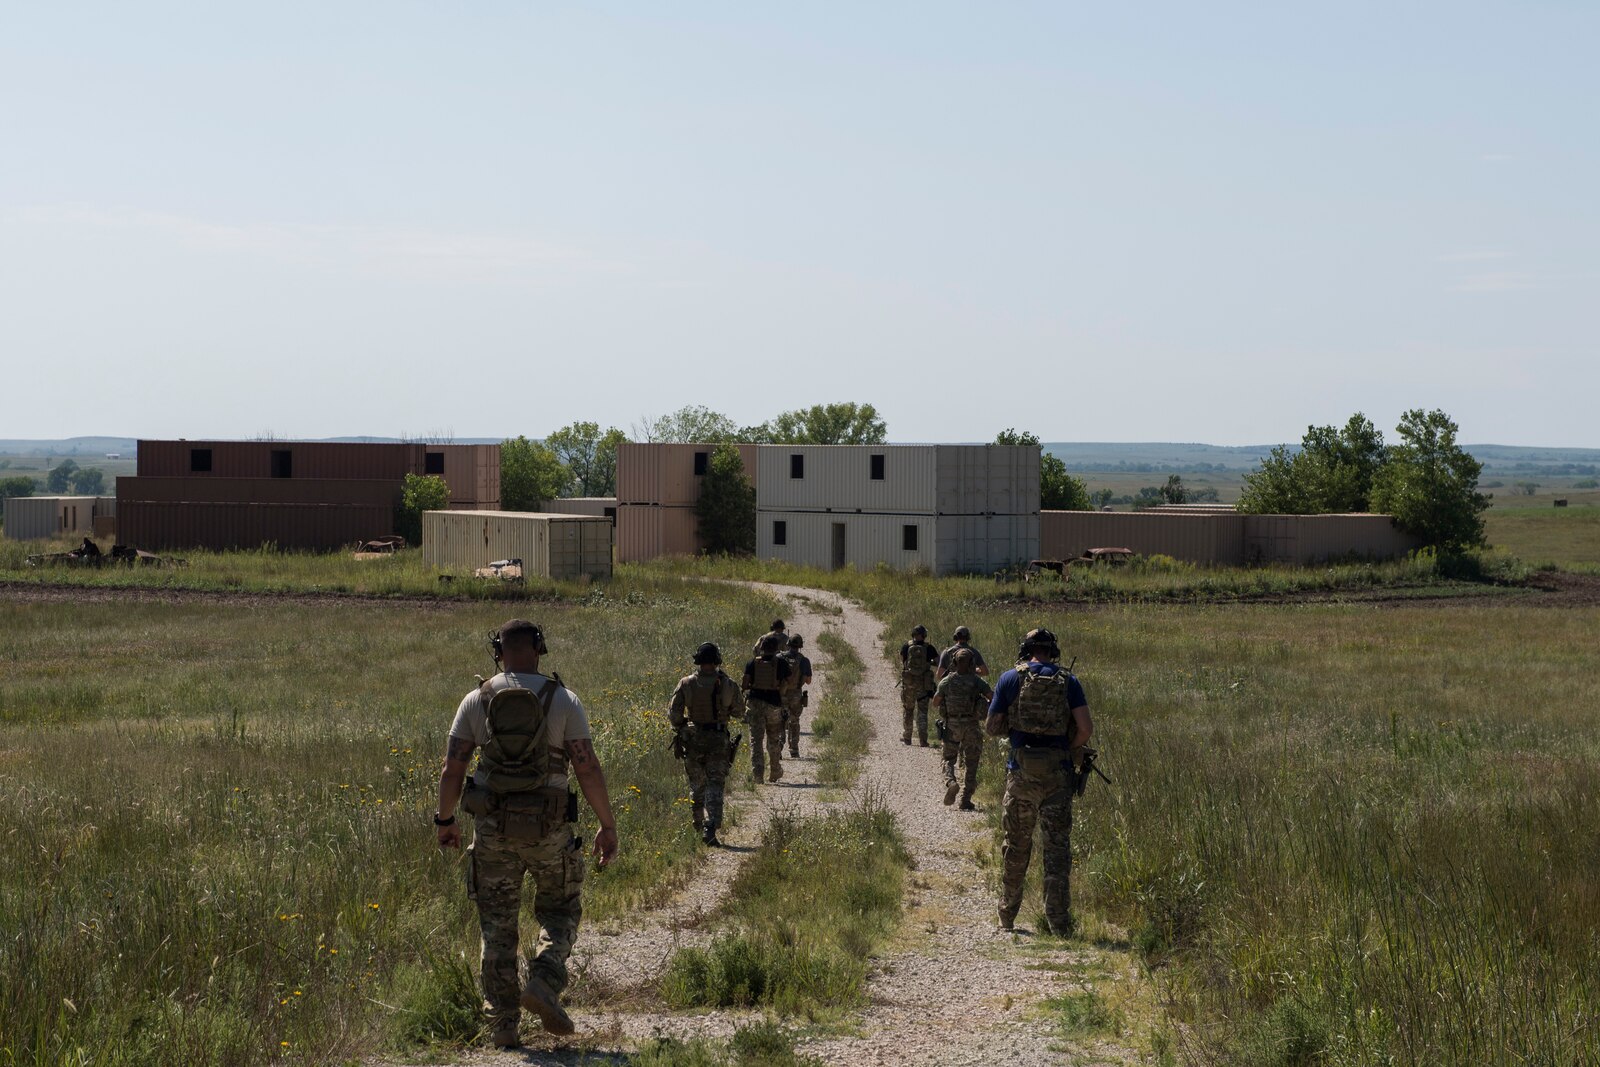 Students trek into a simulated village during a full spectrum operator course, Aug. 29, 2018, at Smoky Hill Air National Guard Range, Kan. The course was held Aug. 26-31, and incorporated specific duties performed by tactical air control party members and security forces personnel to build on their gunfighting skills. (U.S. Air Force photo by Senior Airman Janiqua P. Robinson)